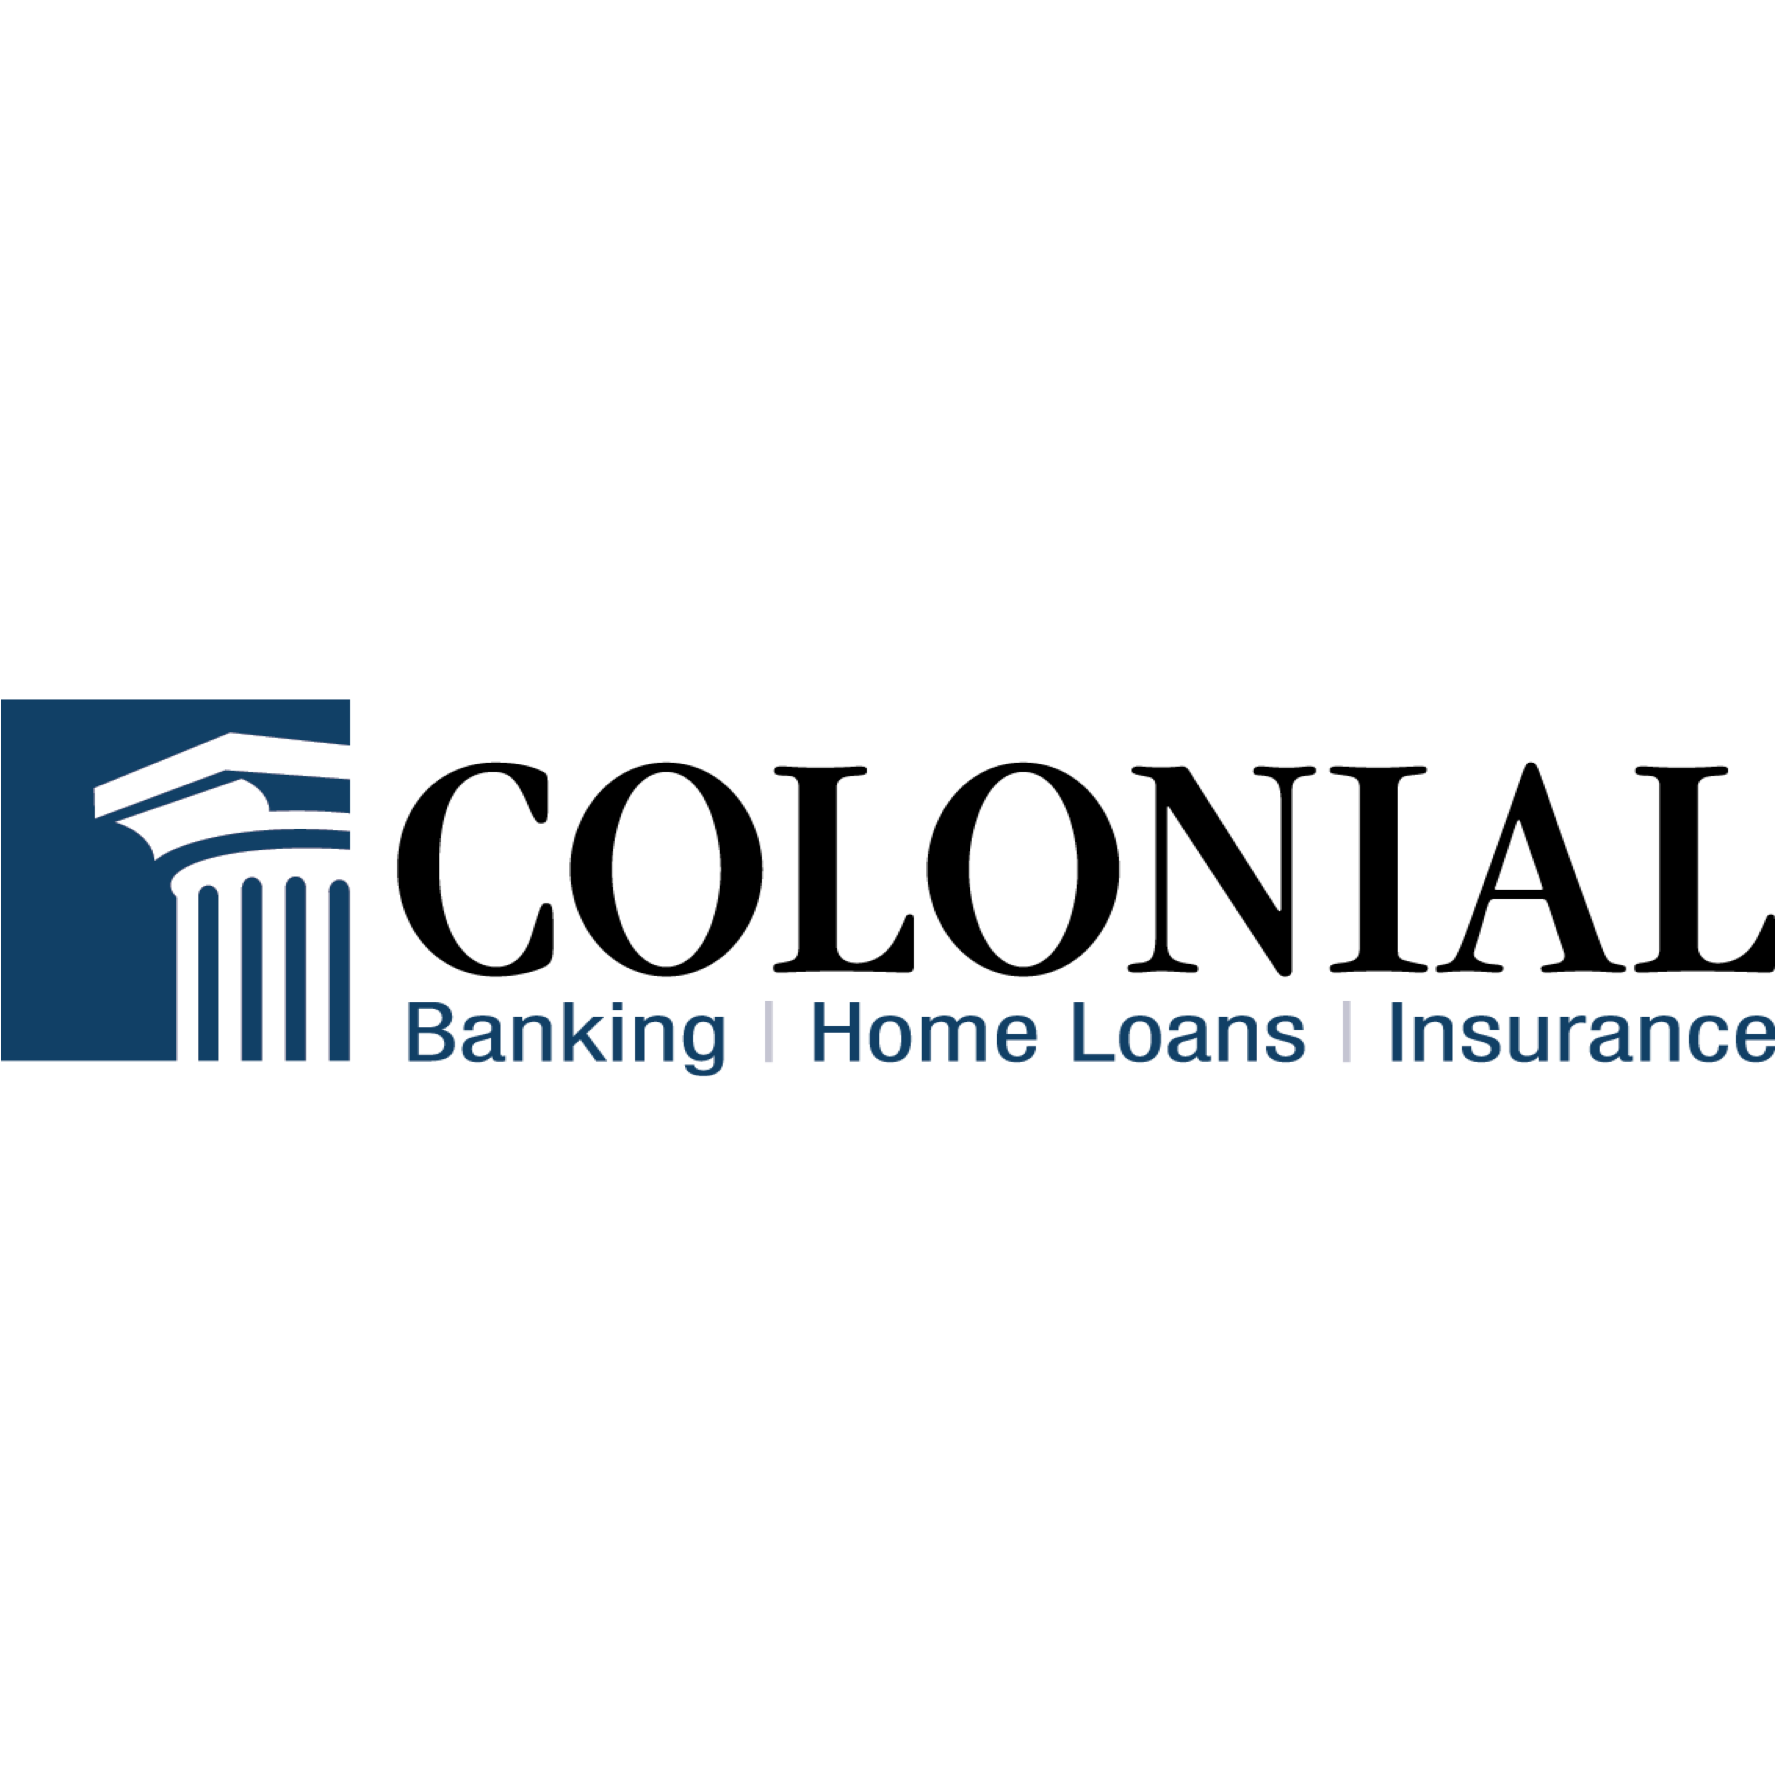 Colonial - Banking, Home Loans & Insurance - Cleburne